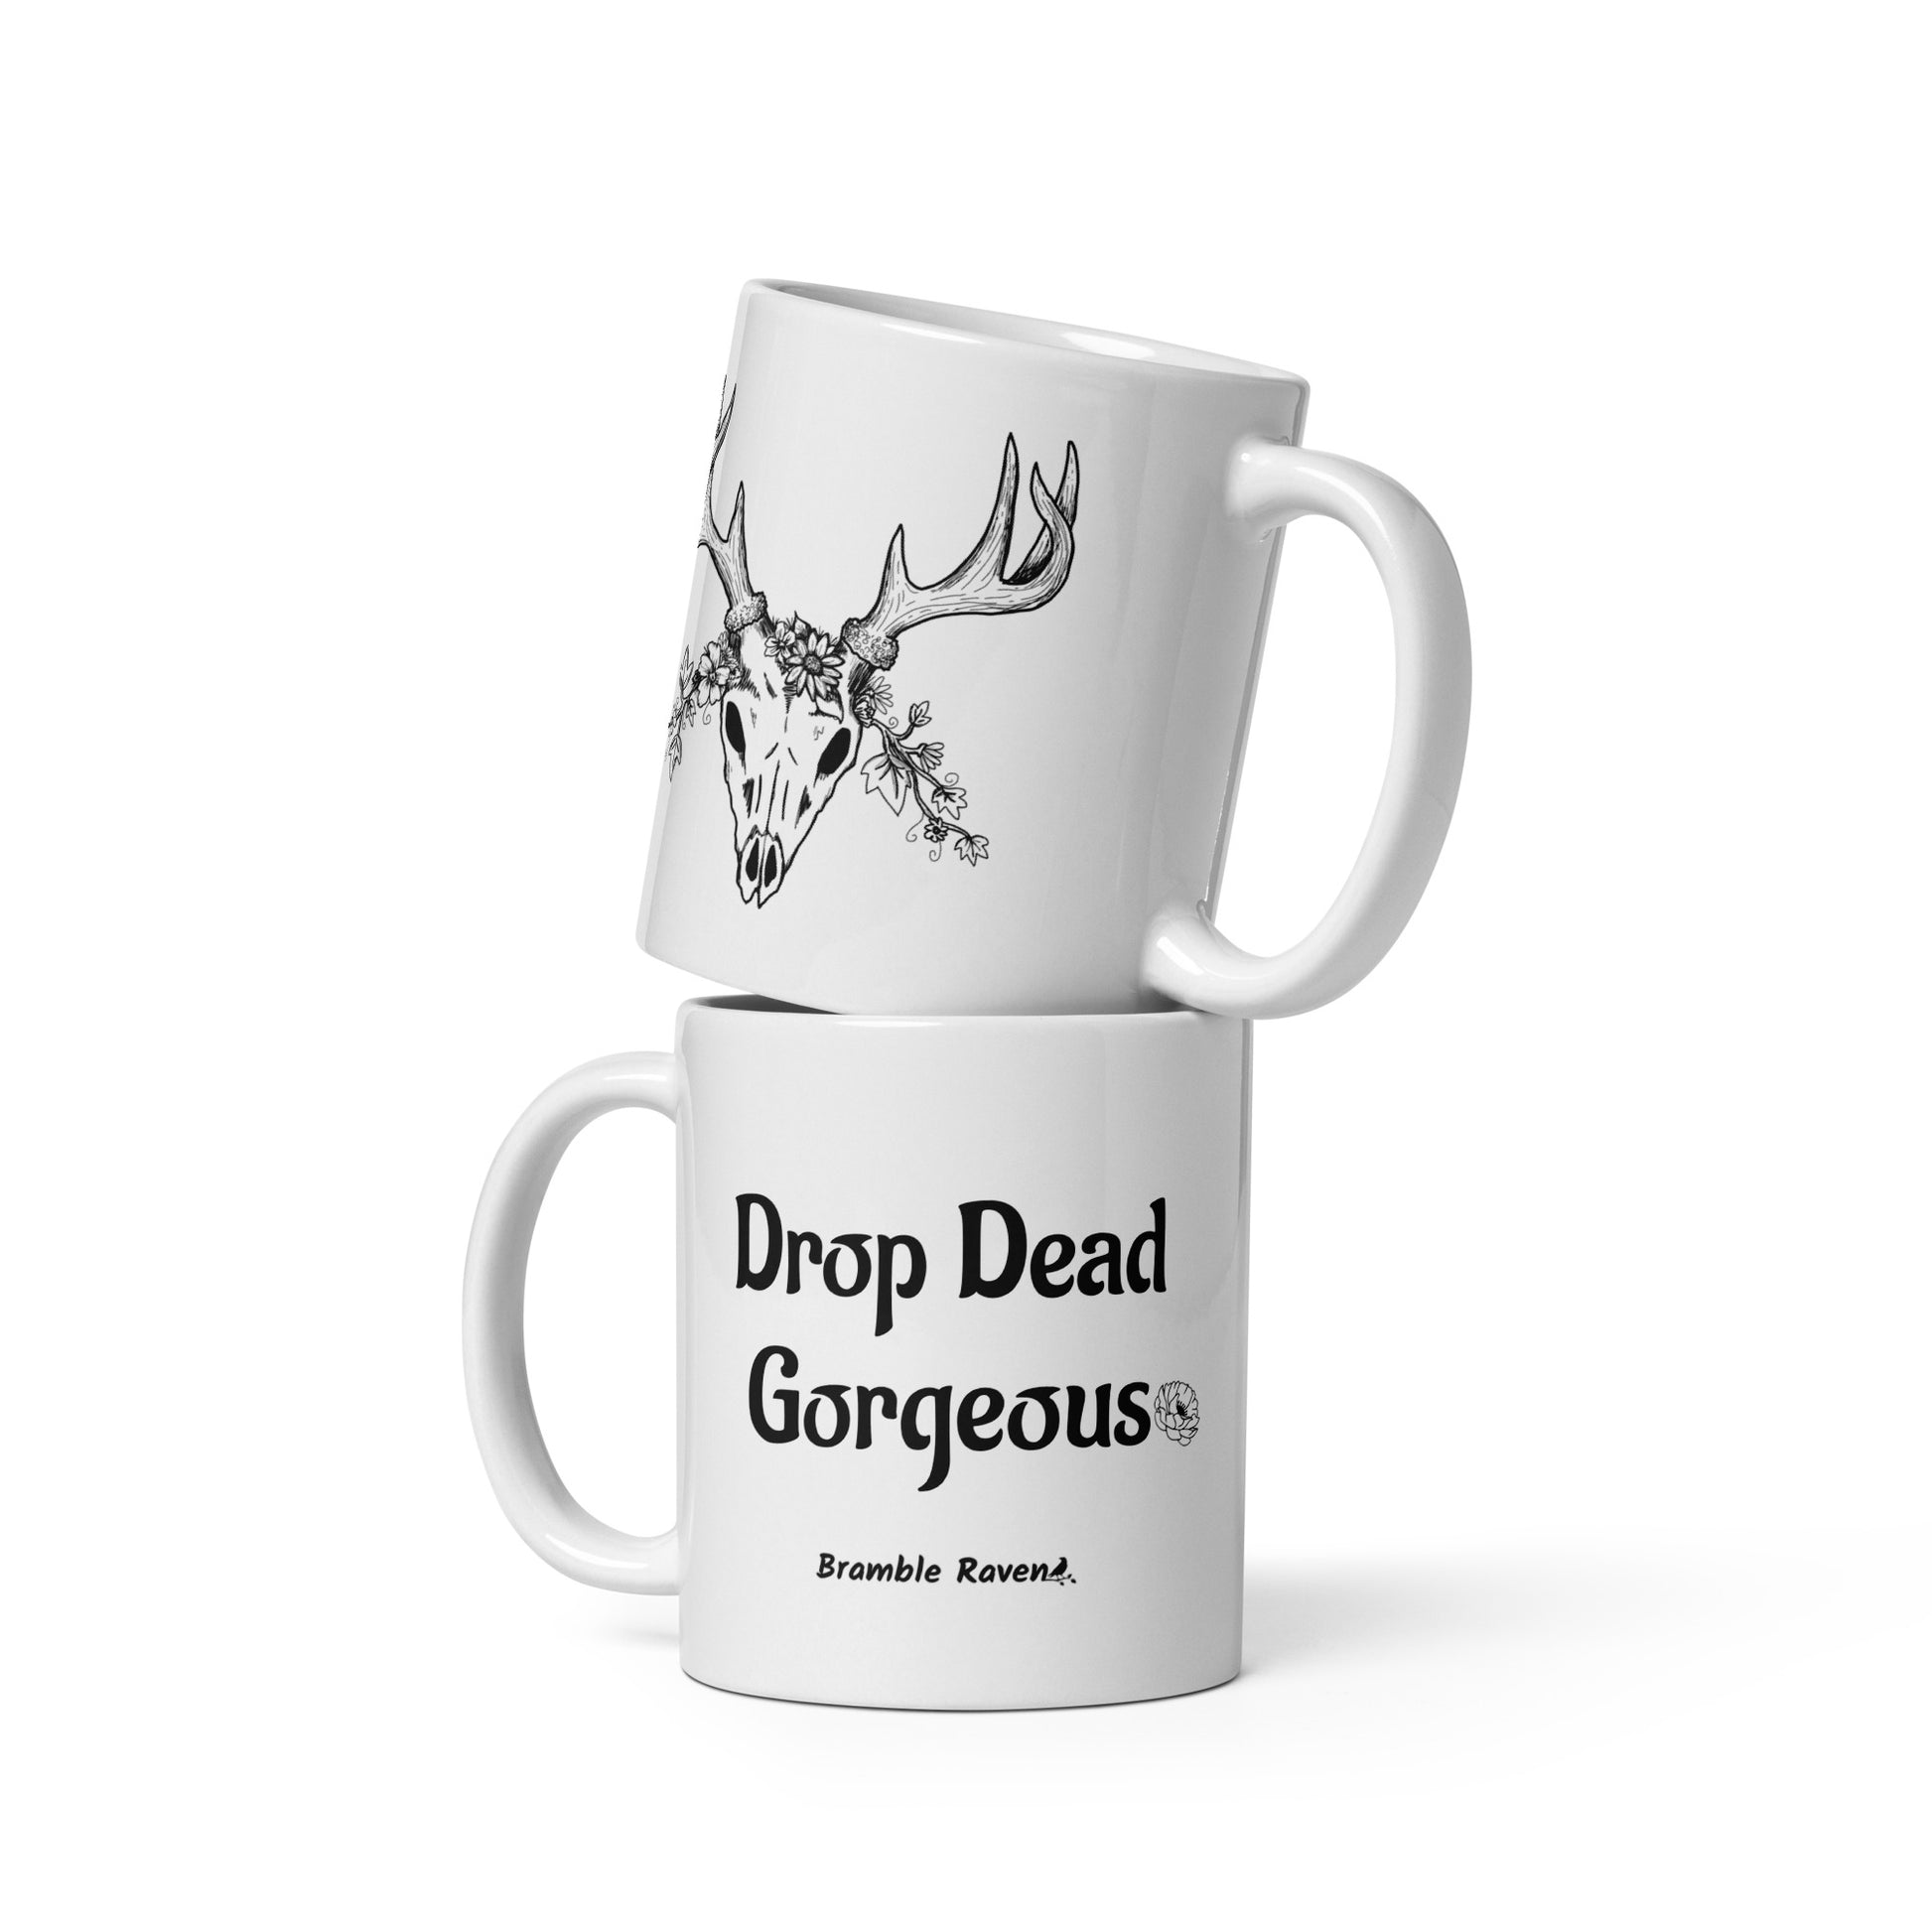 11 ounce white ceramic mug. Features illustrated deer skull wreathed in flowers on one side and Drop dead gorgeous text on the other side. Dishwasher and microwave safe.